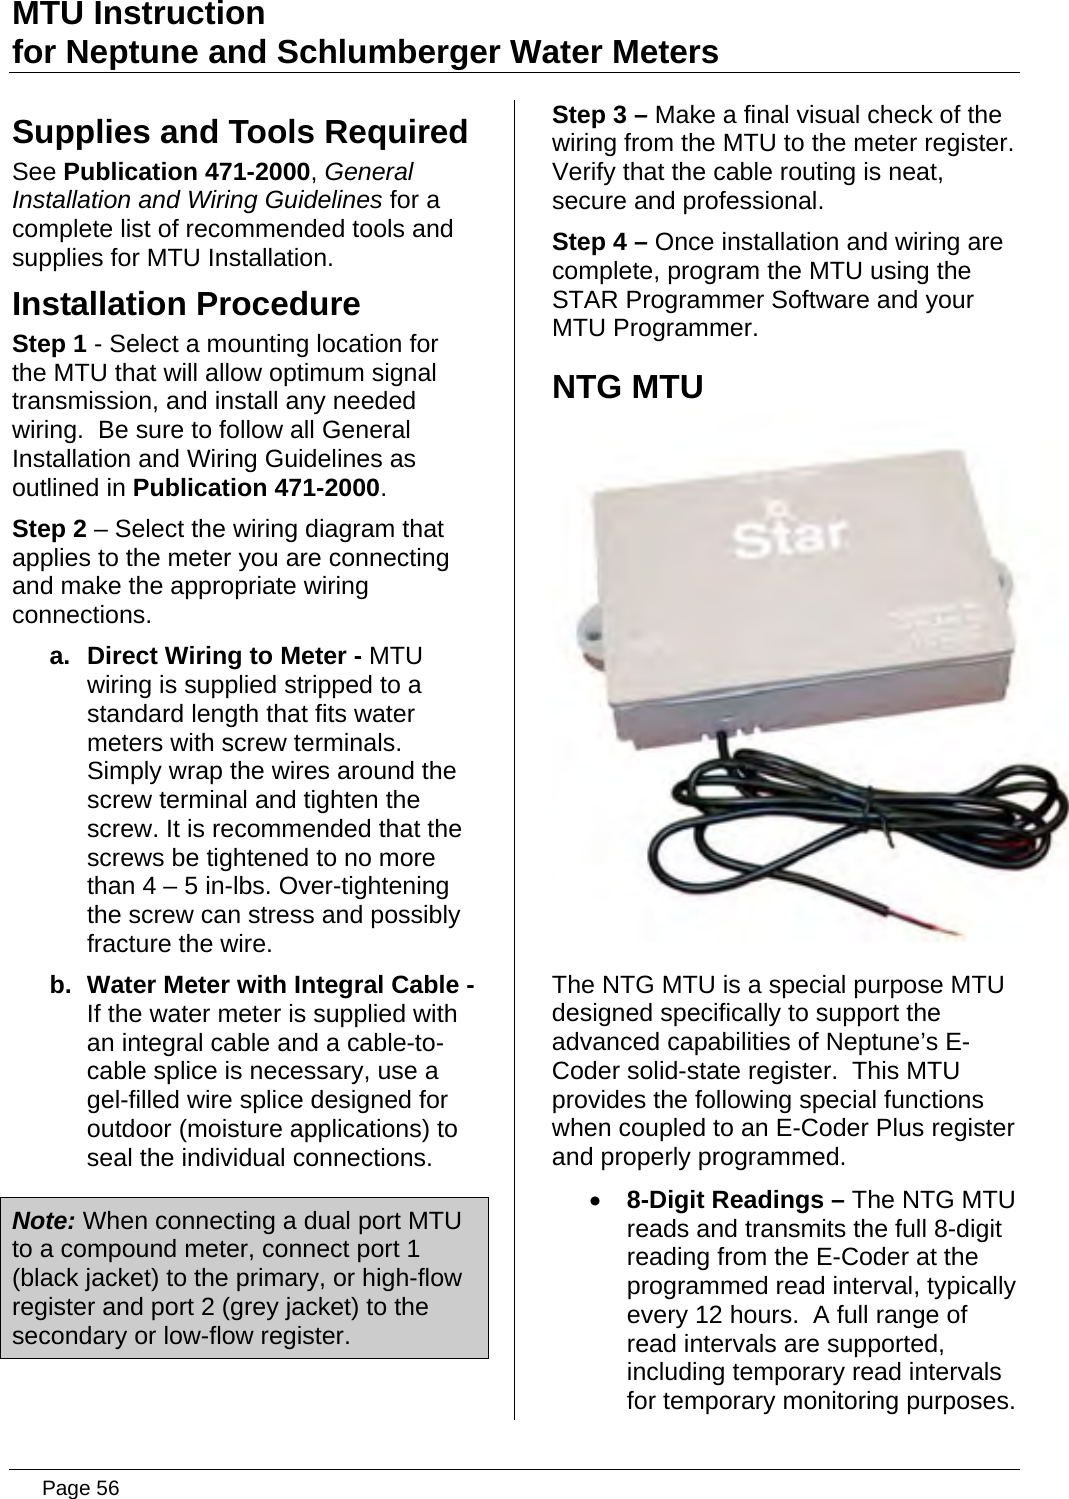 Page 56 of Aclara Technologies 09015 Transmitter for Meter Reading User Manual users manual